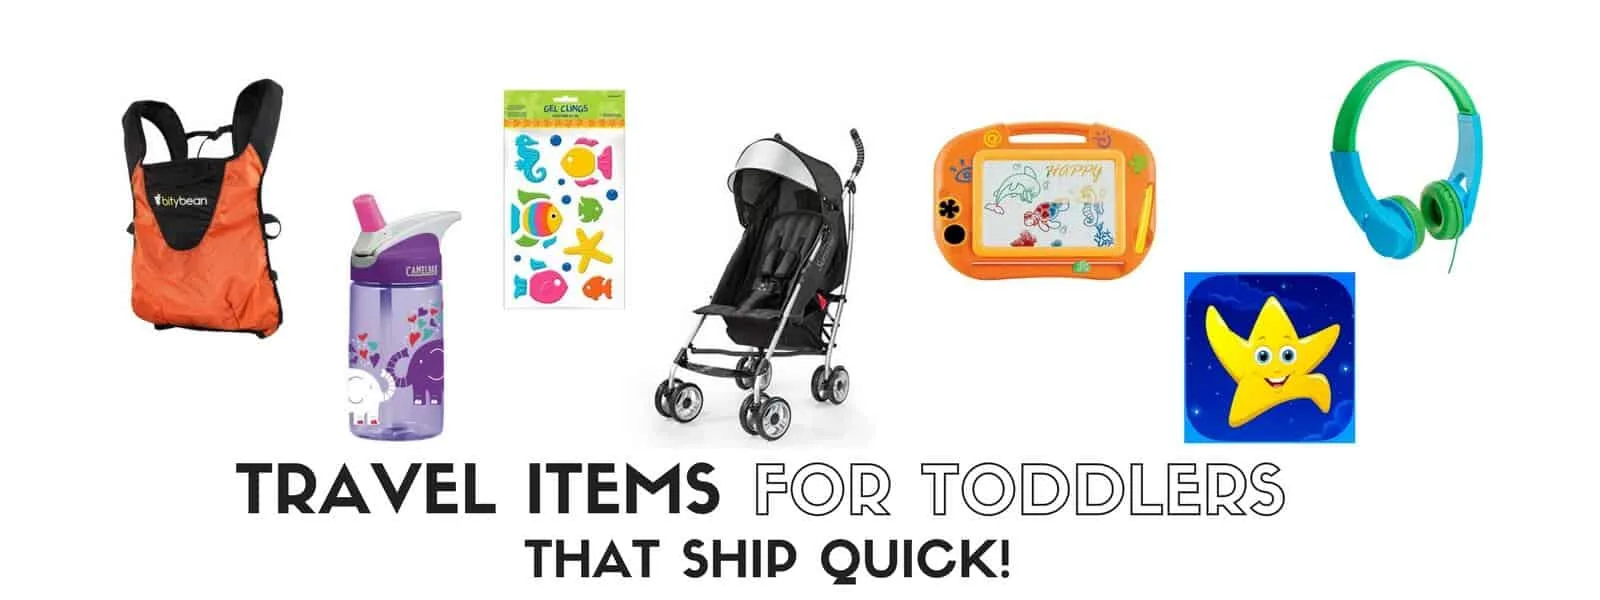 Image graphic with text for Travel Items for Toddlers that Ship Quick.